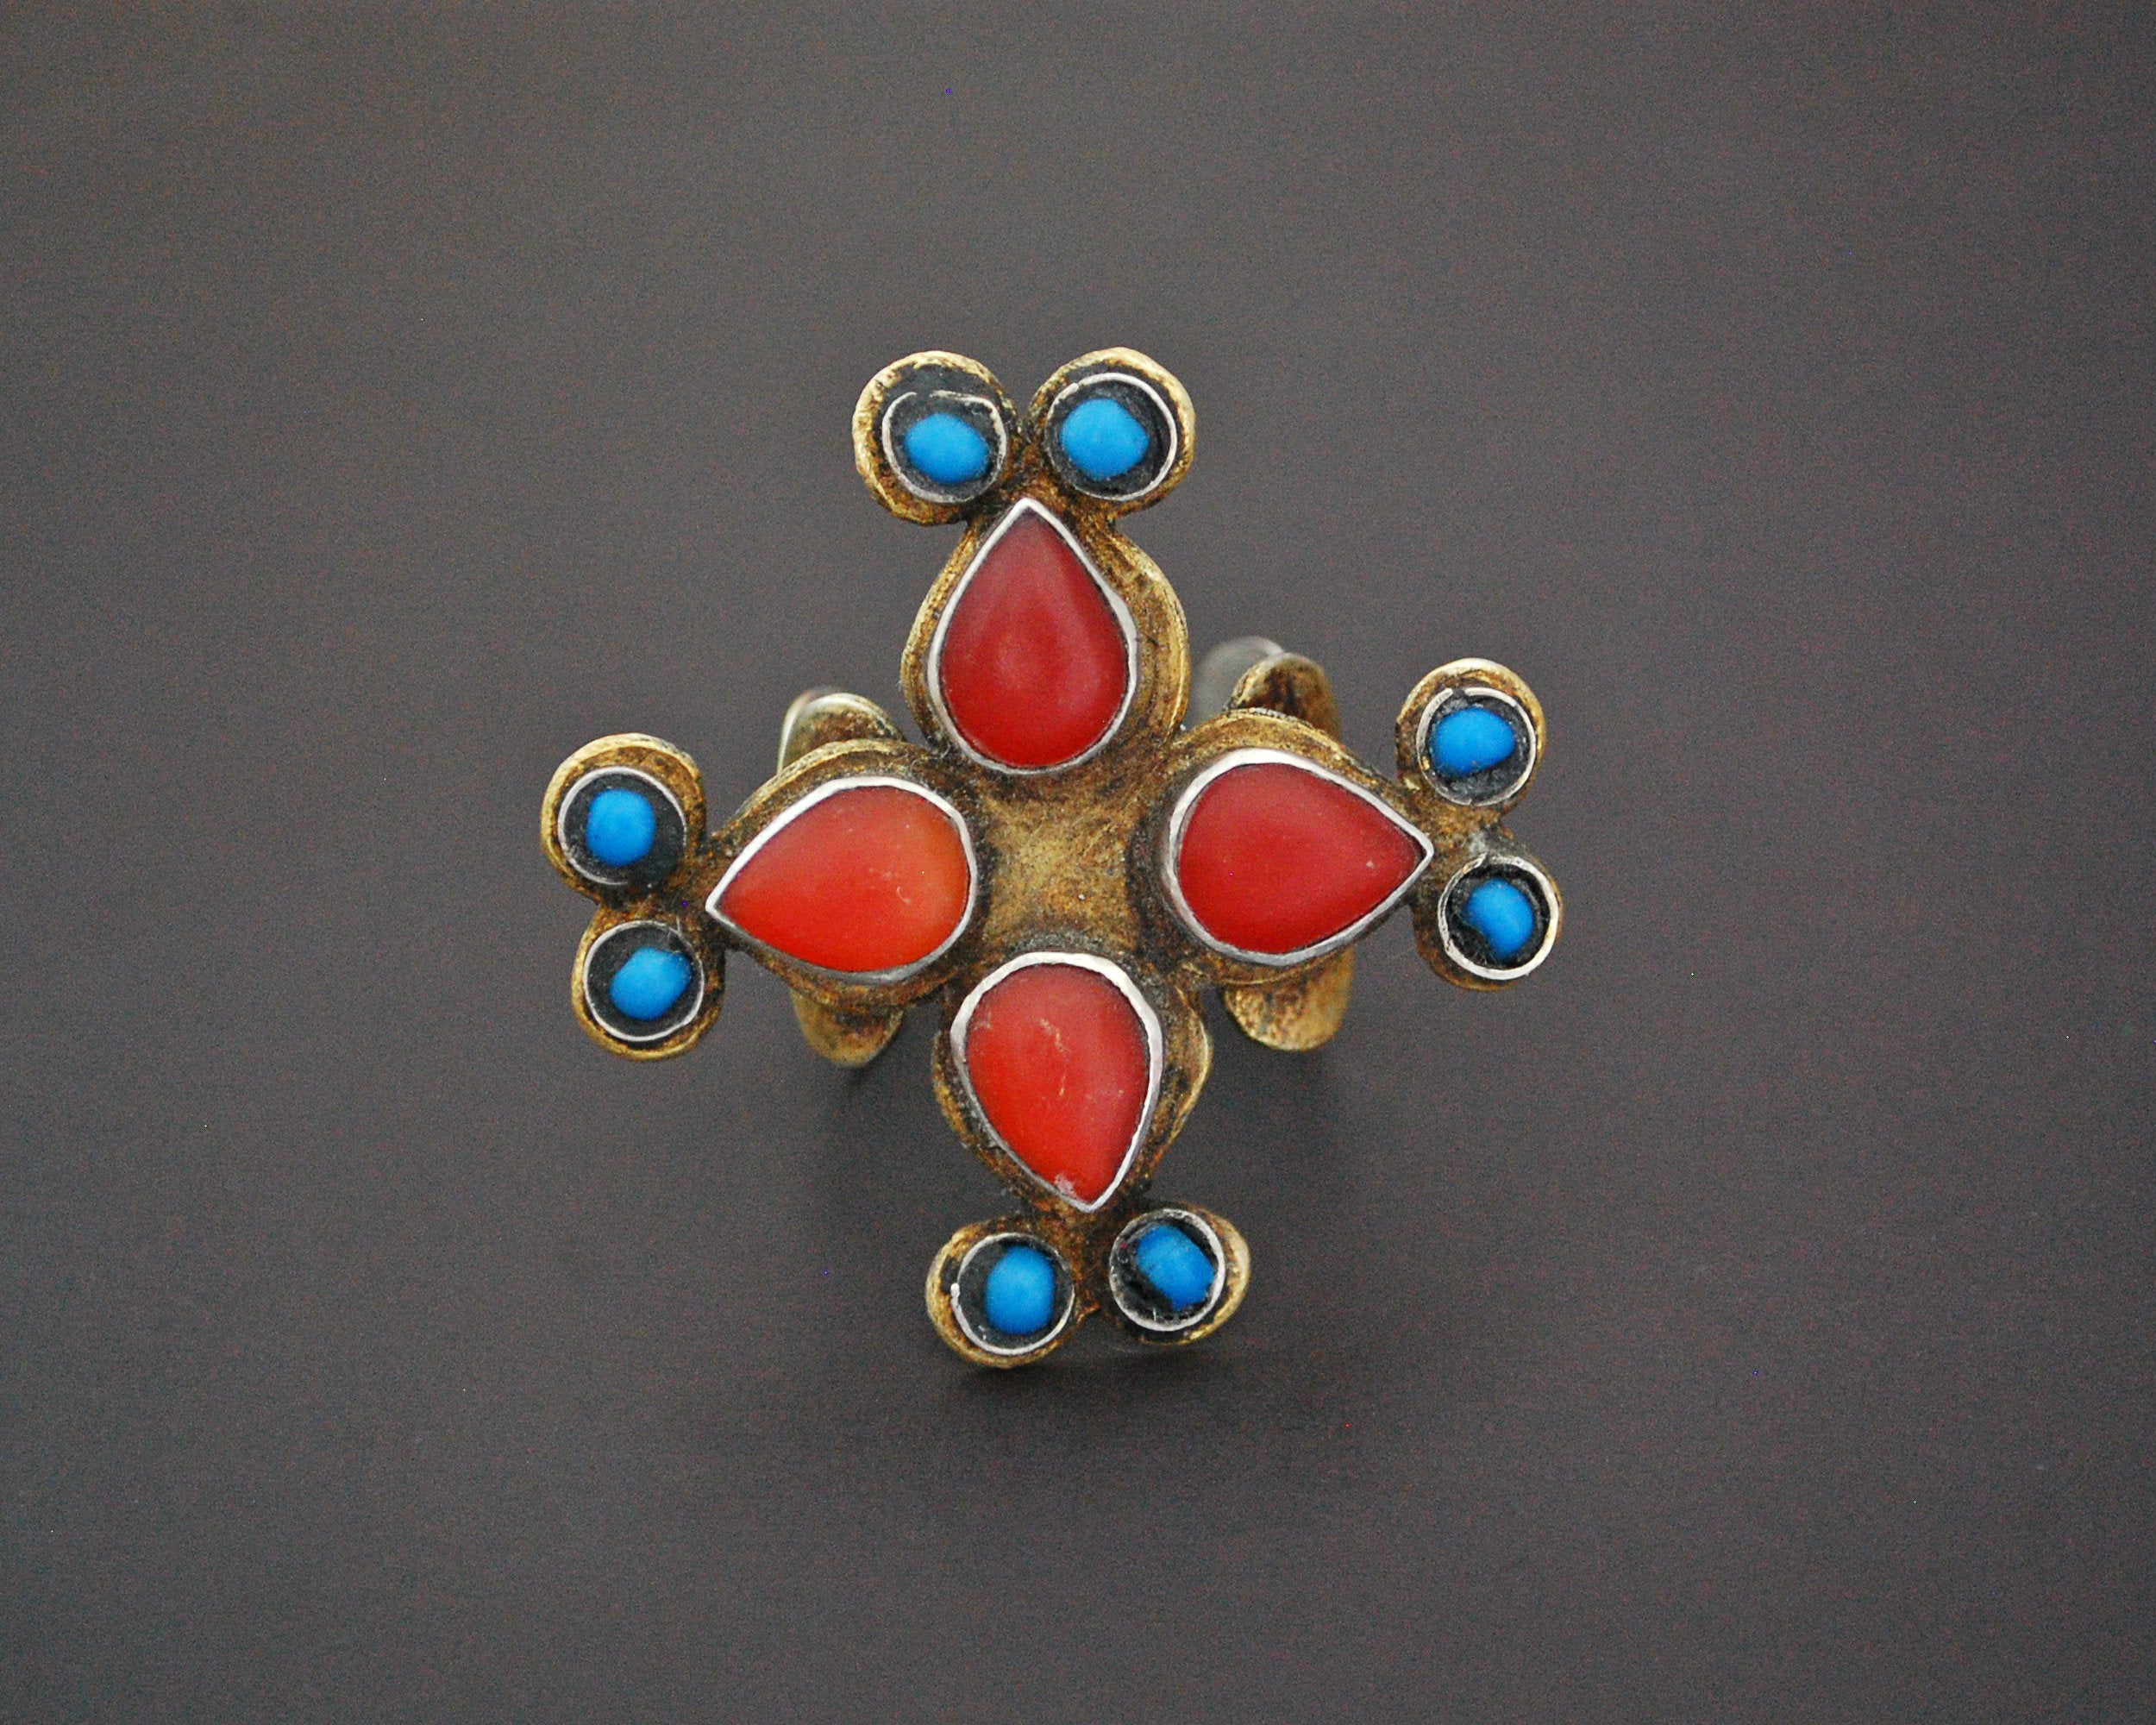 Vintage Turkmen Gilded Ring with Carnelian and Turquoise - Size 9